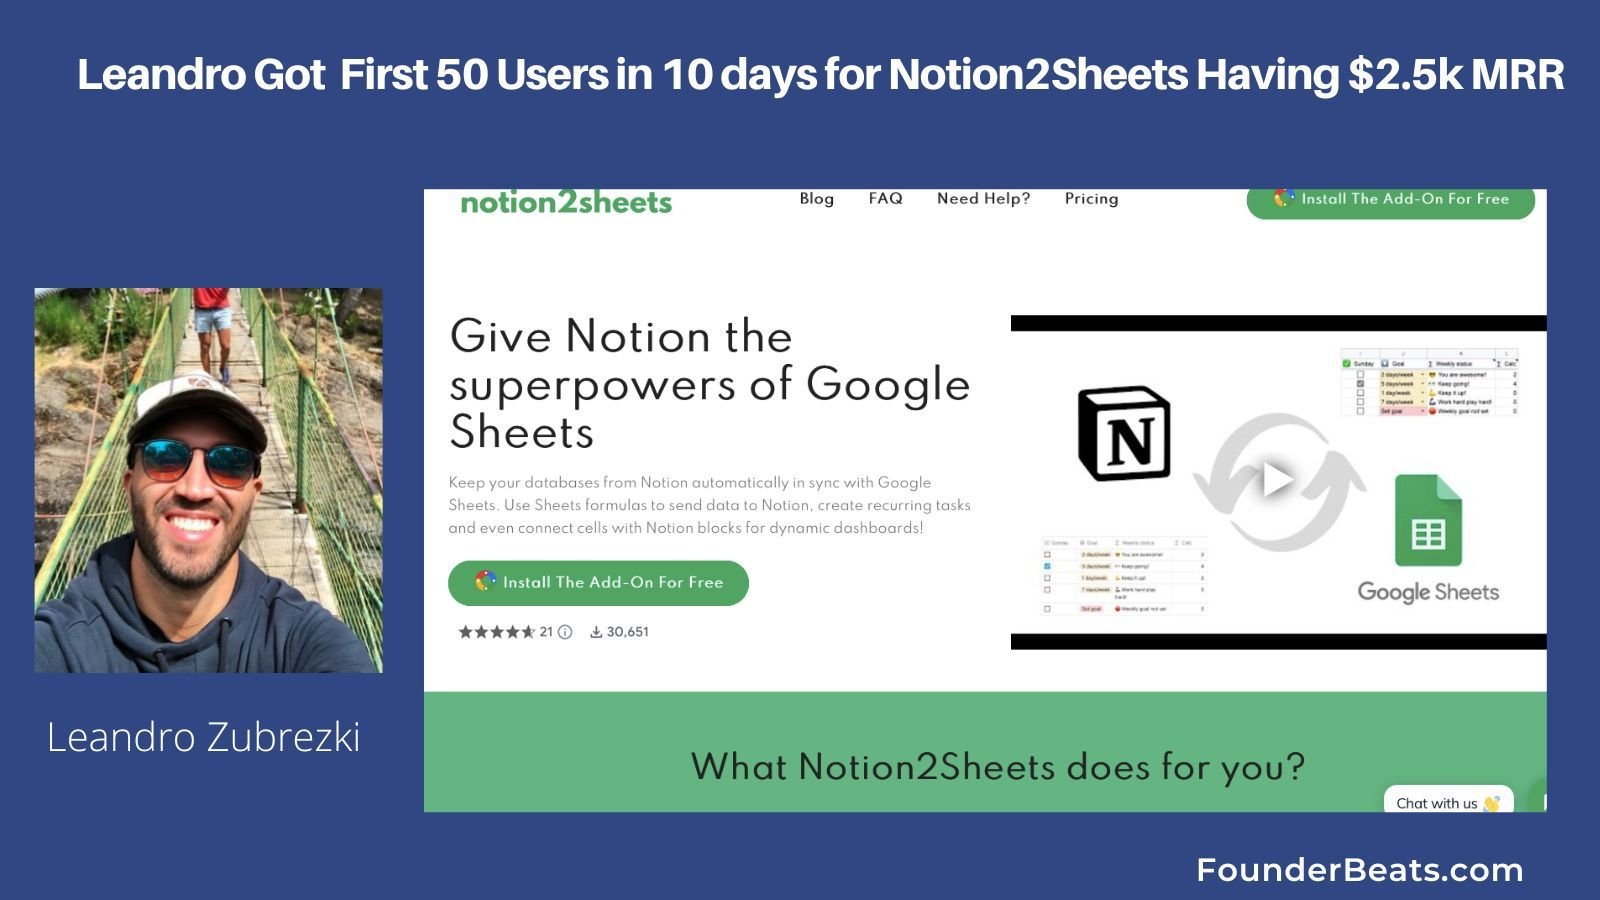 Leandro Acquired First 50 Users in 10 days for Notion2Sheets Having $2.5K MRR